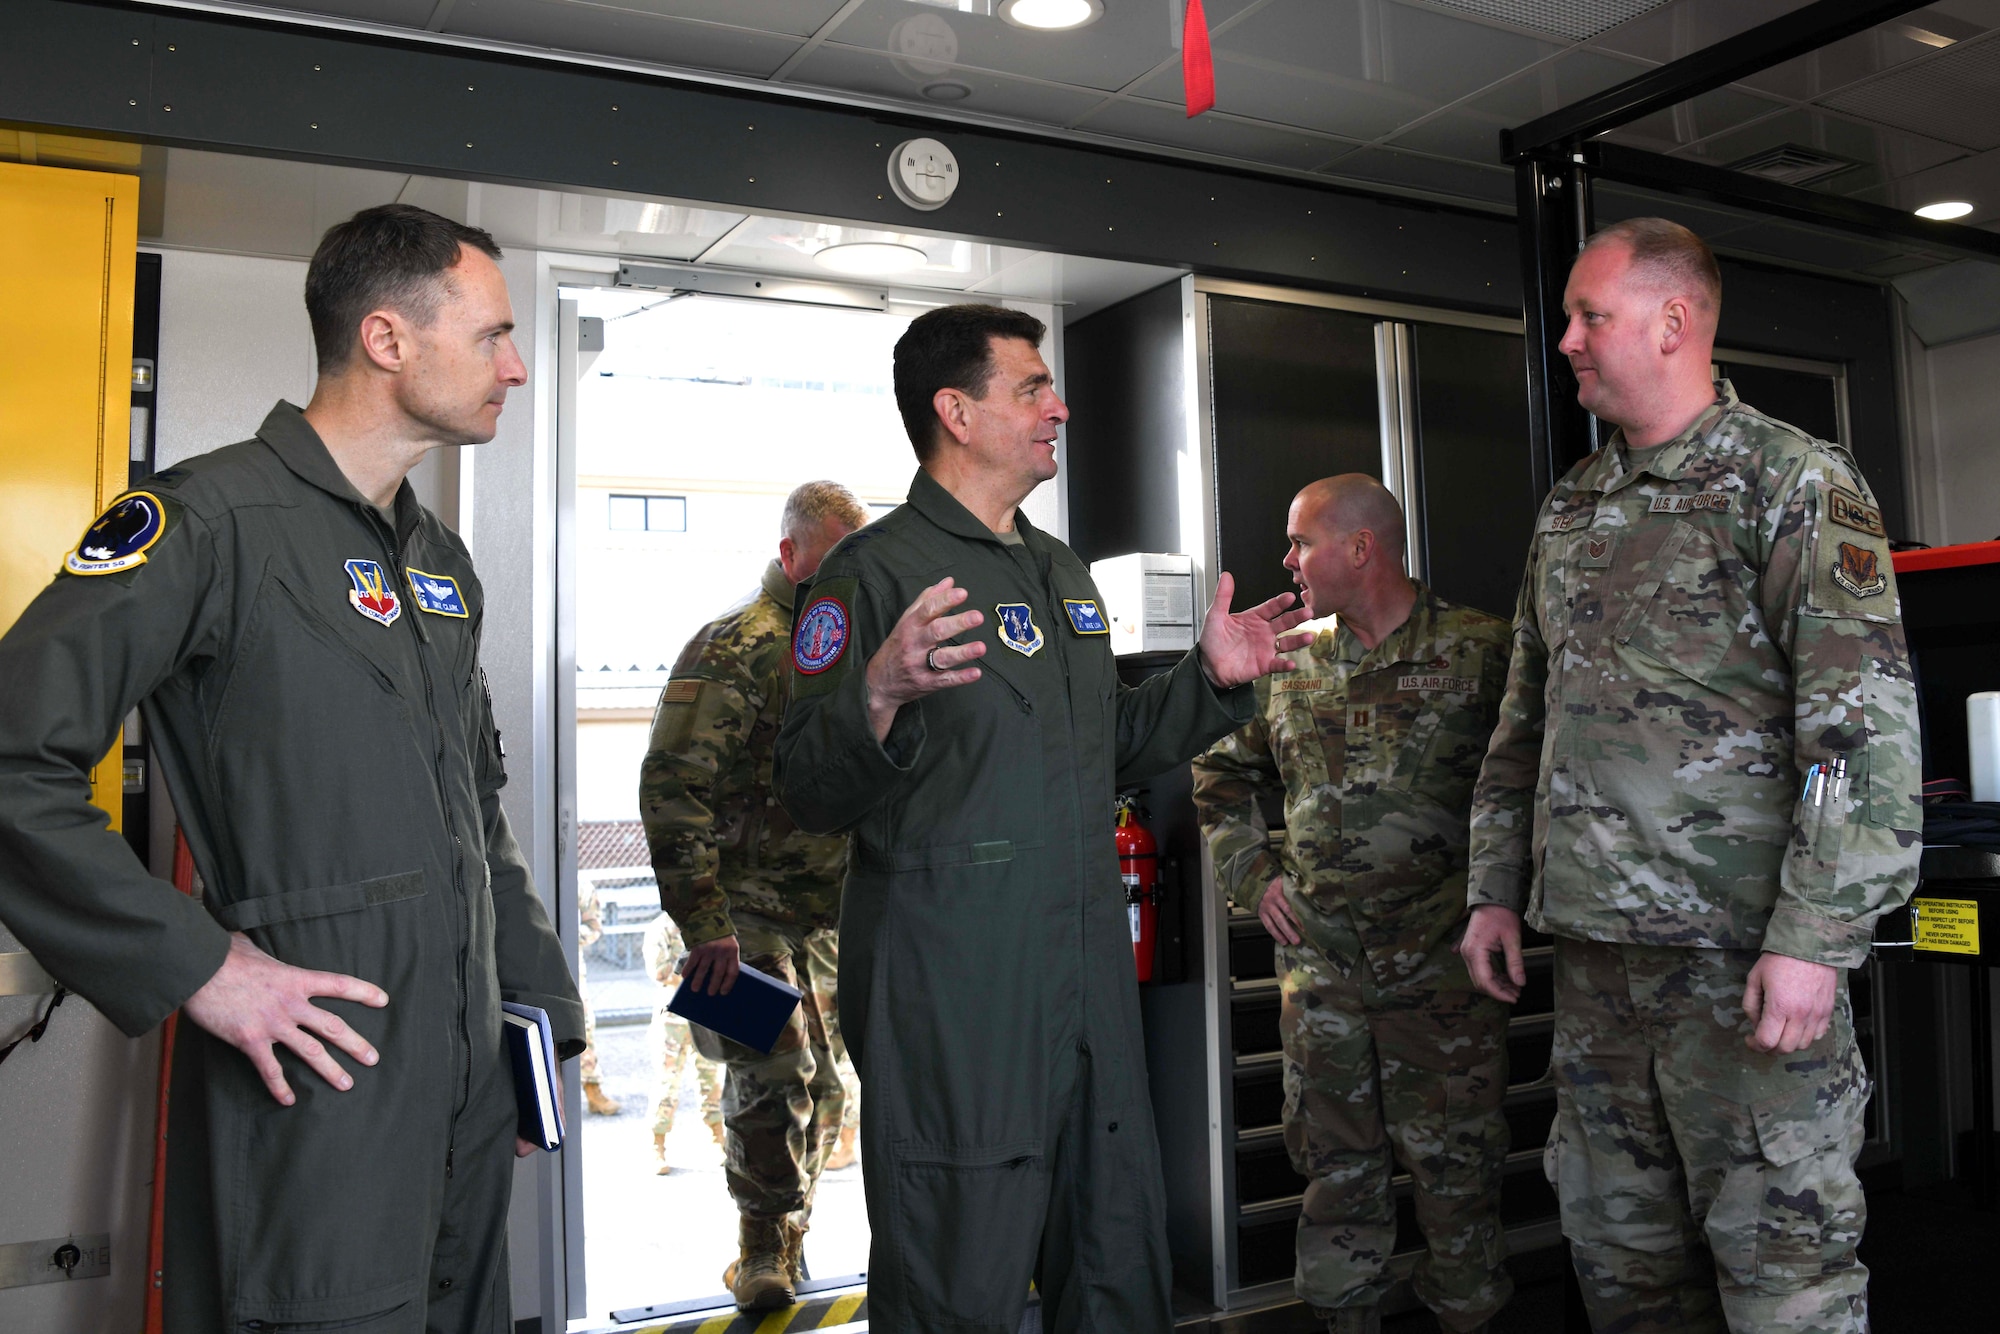 two men on the left in green military flightsuit uniforms speak to a man on the right wearing a military camouflage uniform